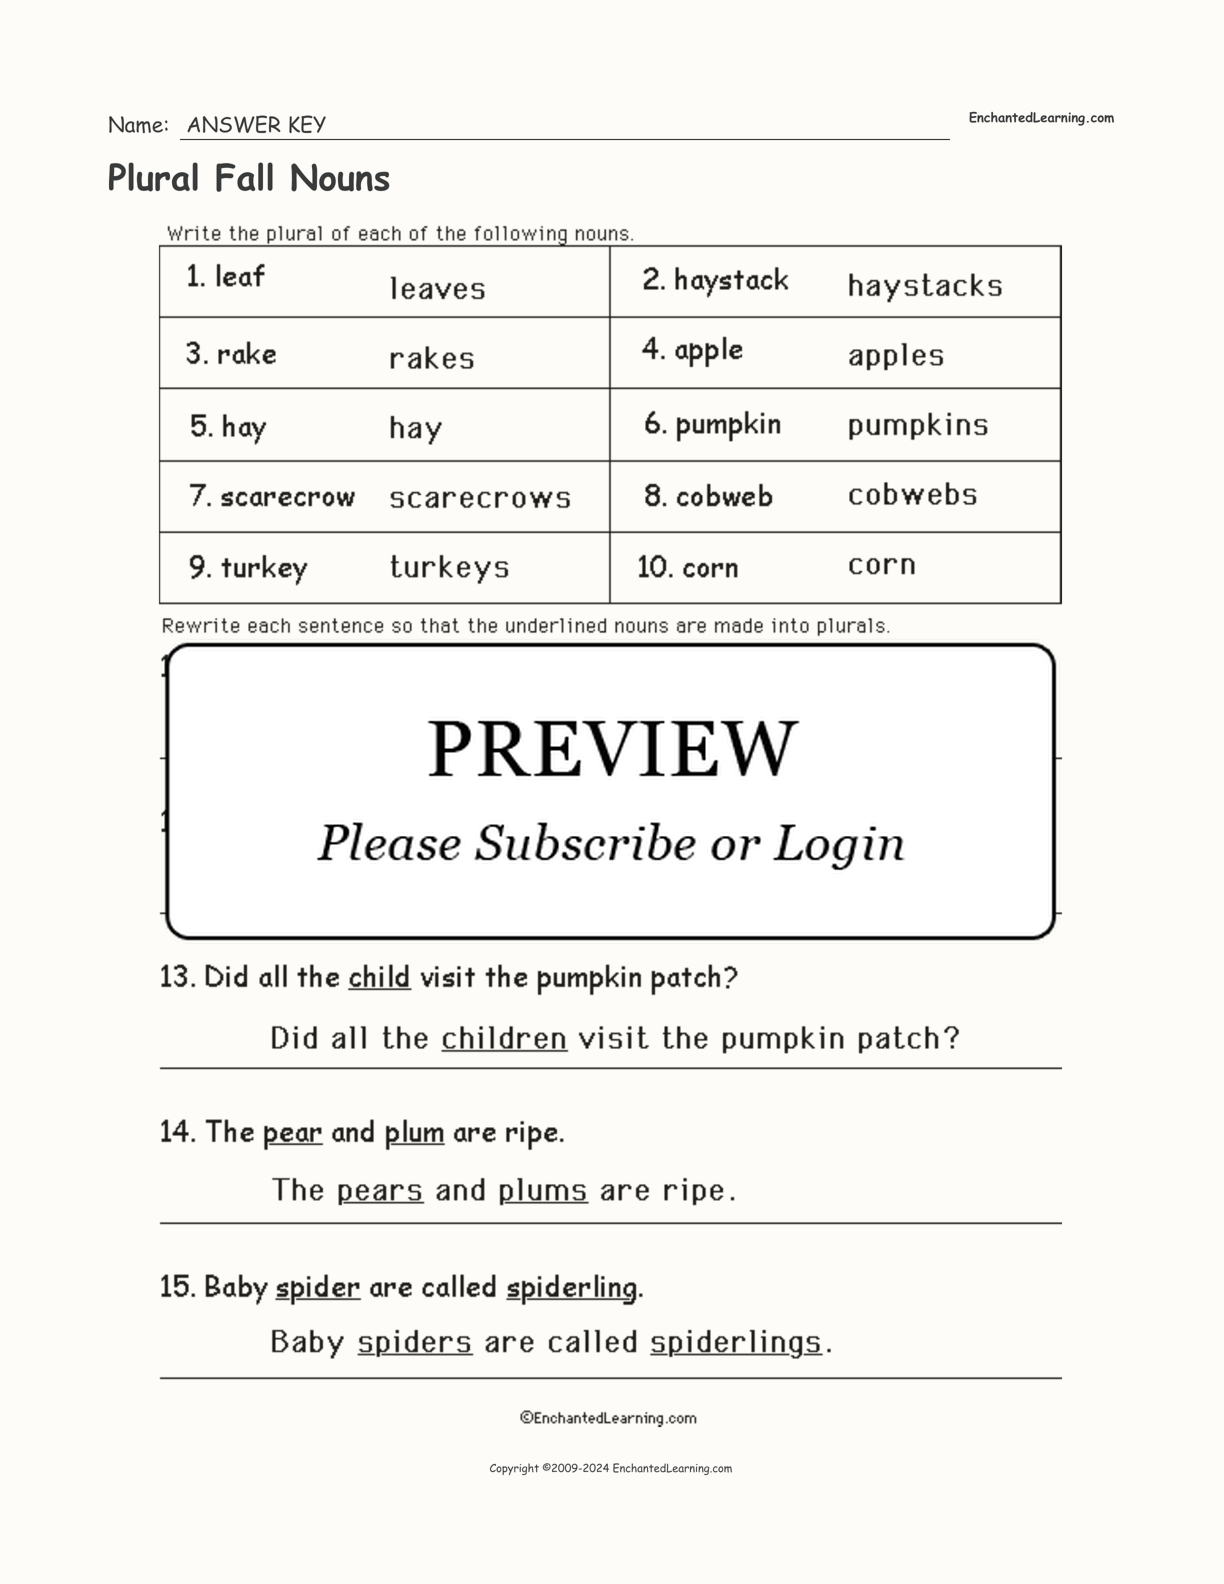 Plural Fall Nouns interactive worksheet page 2